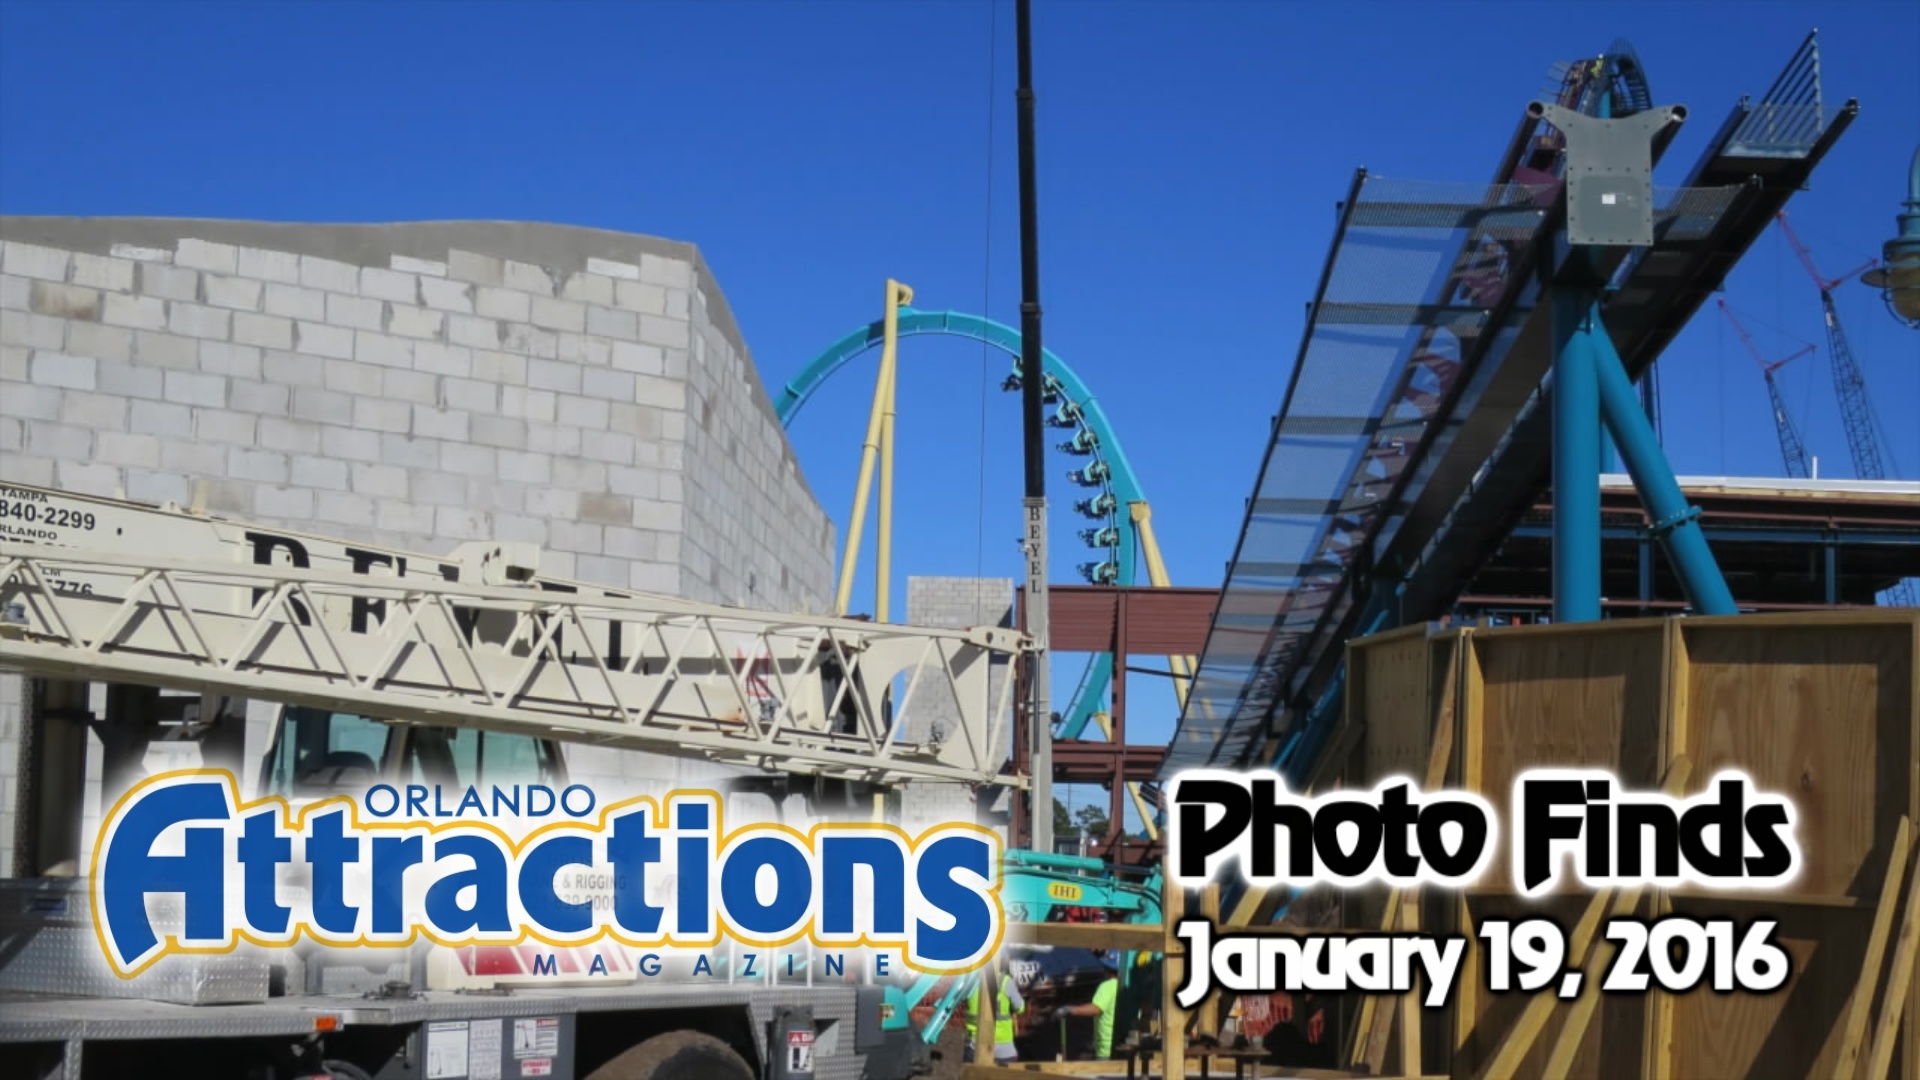 Photo Finds – Construction at SeaWorld – Jan. 19, 2016